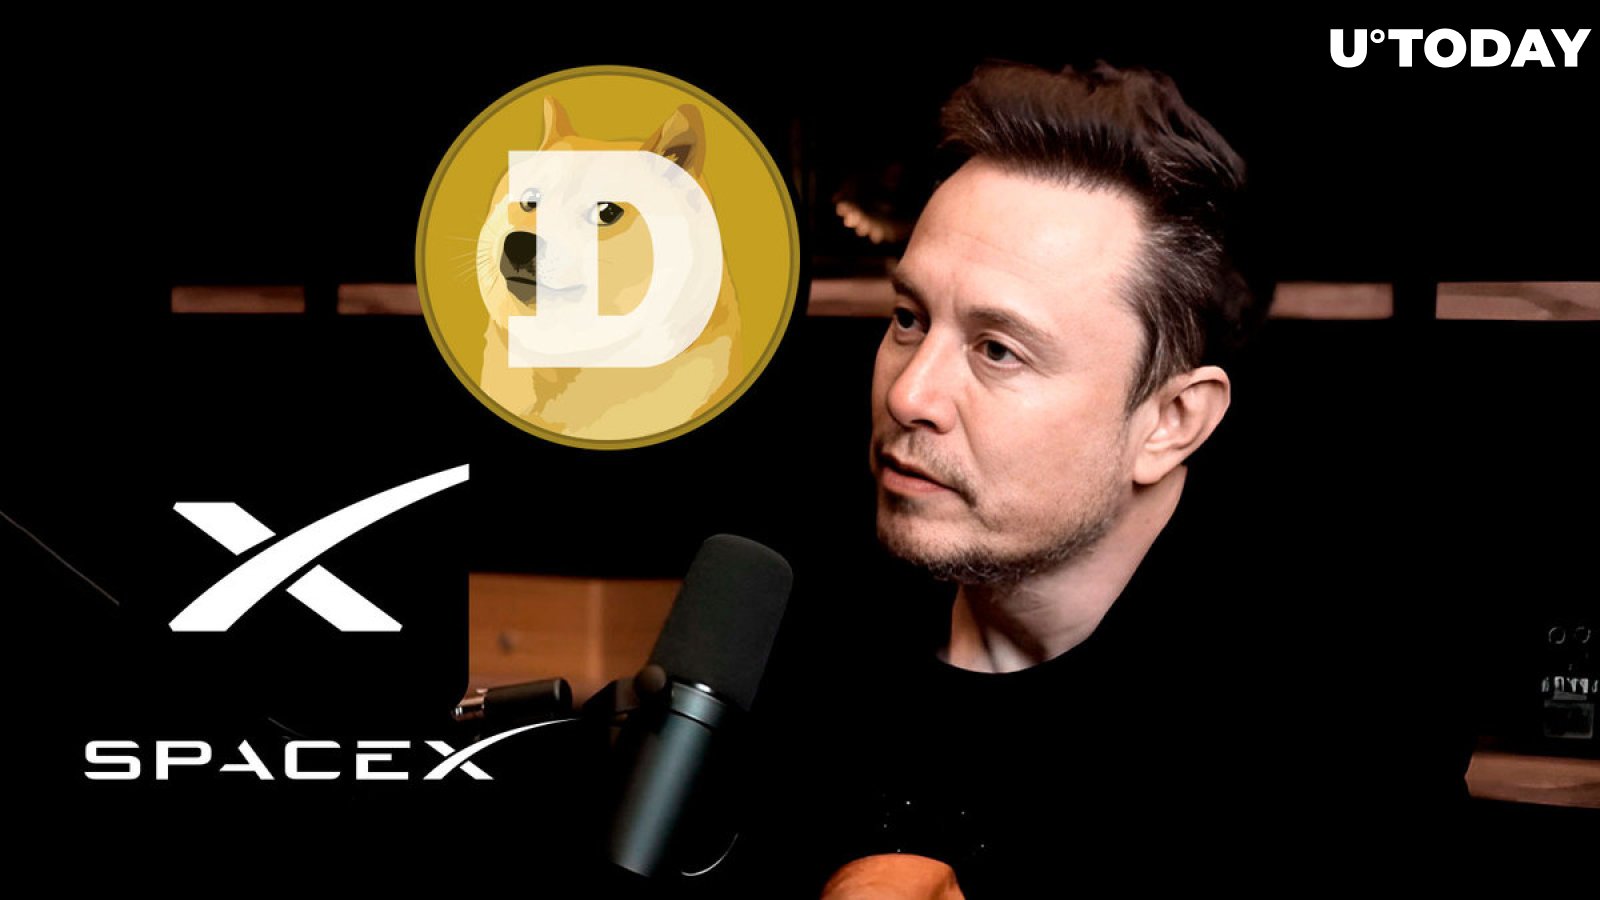 DOGE Community Asks Elon Musk About Dogecoin on Moon After His Intriguing SpaceX Tweet